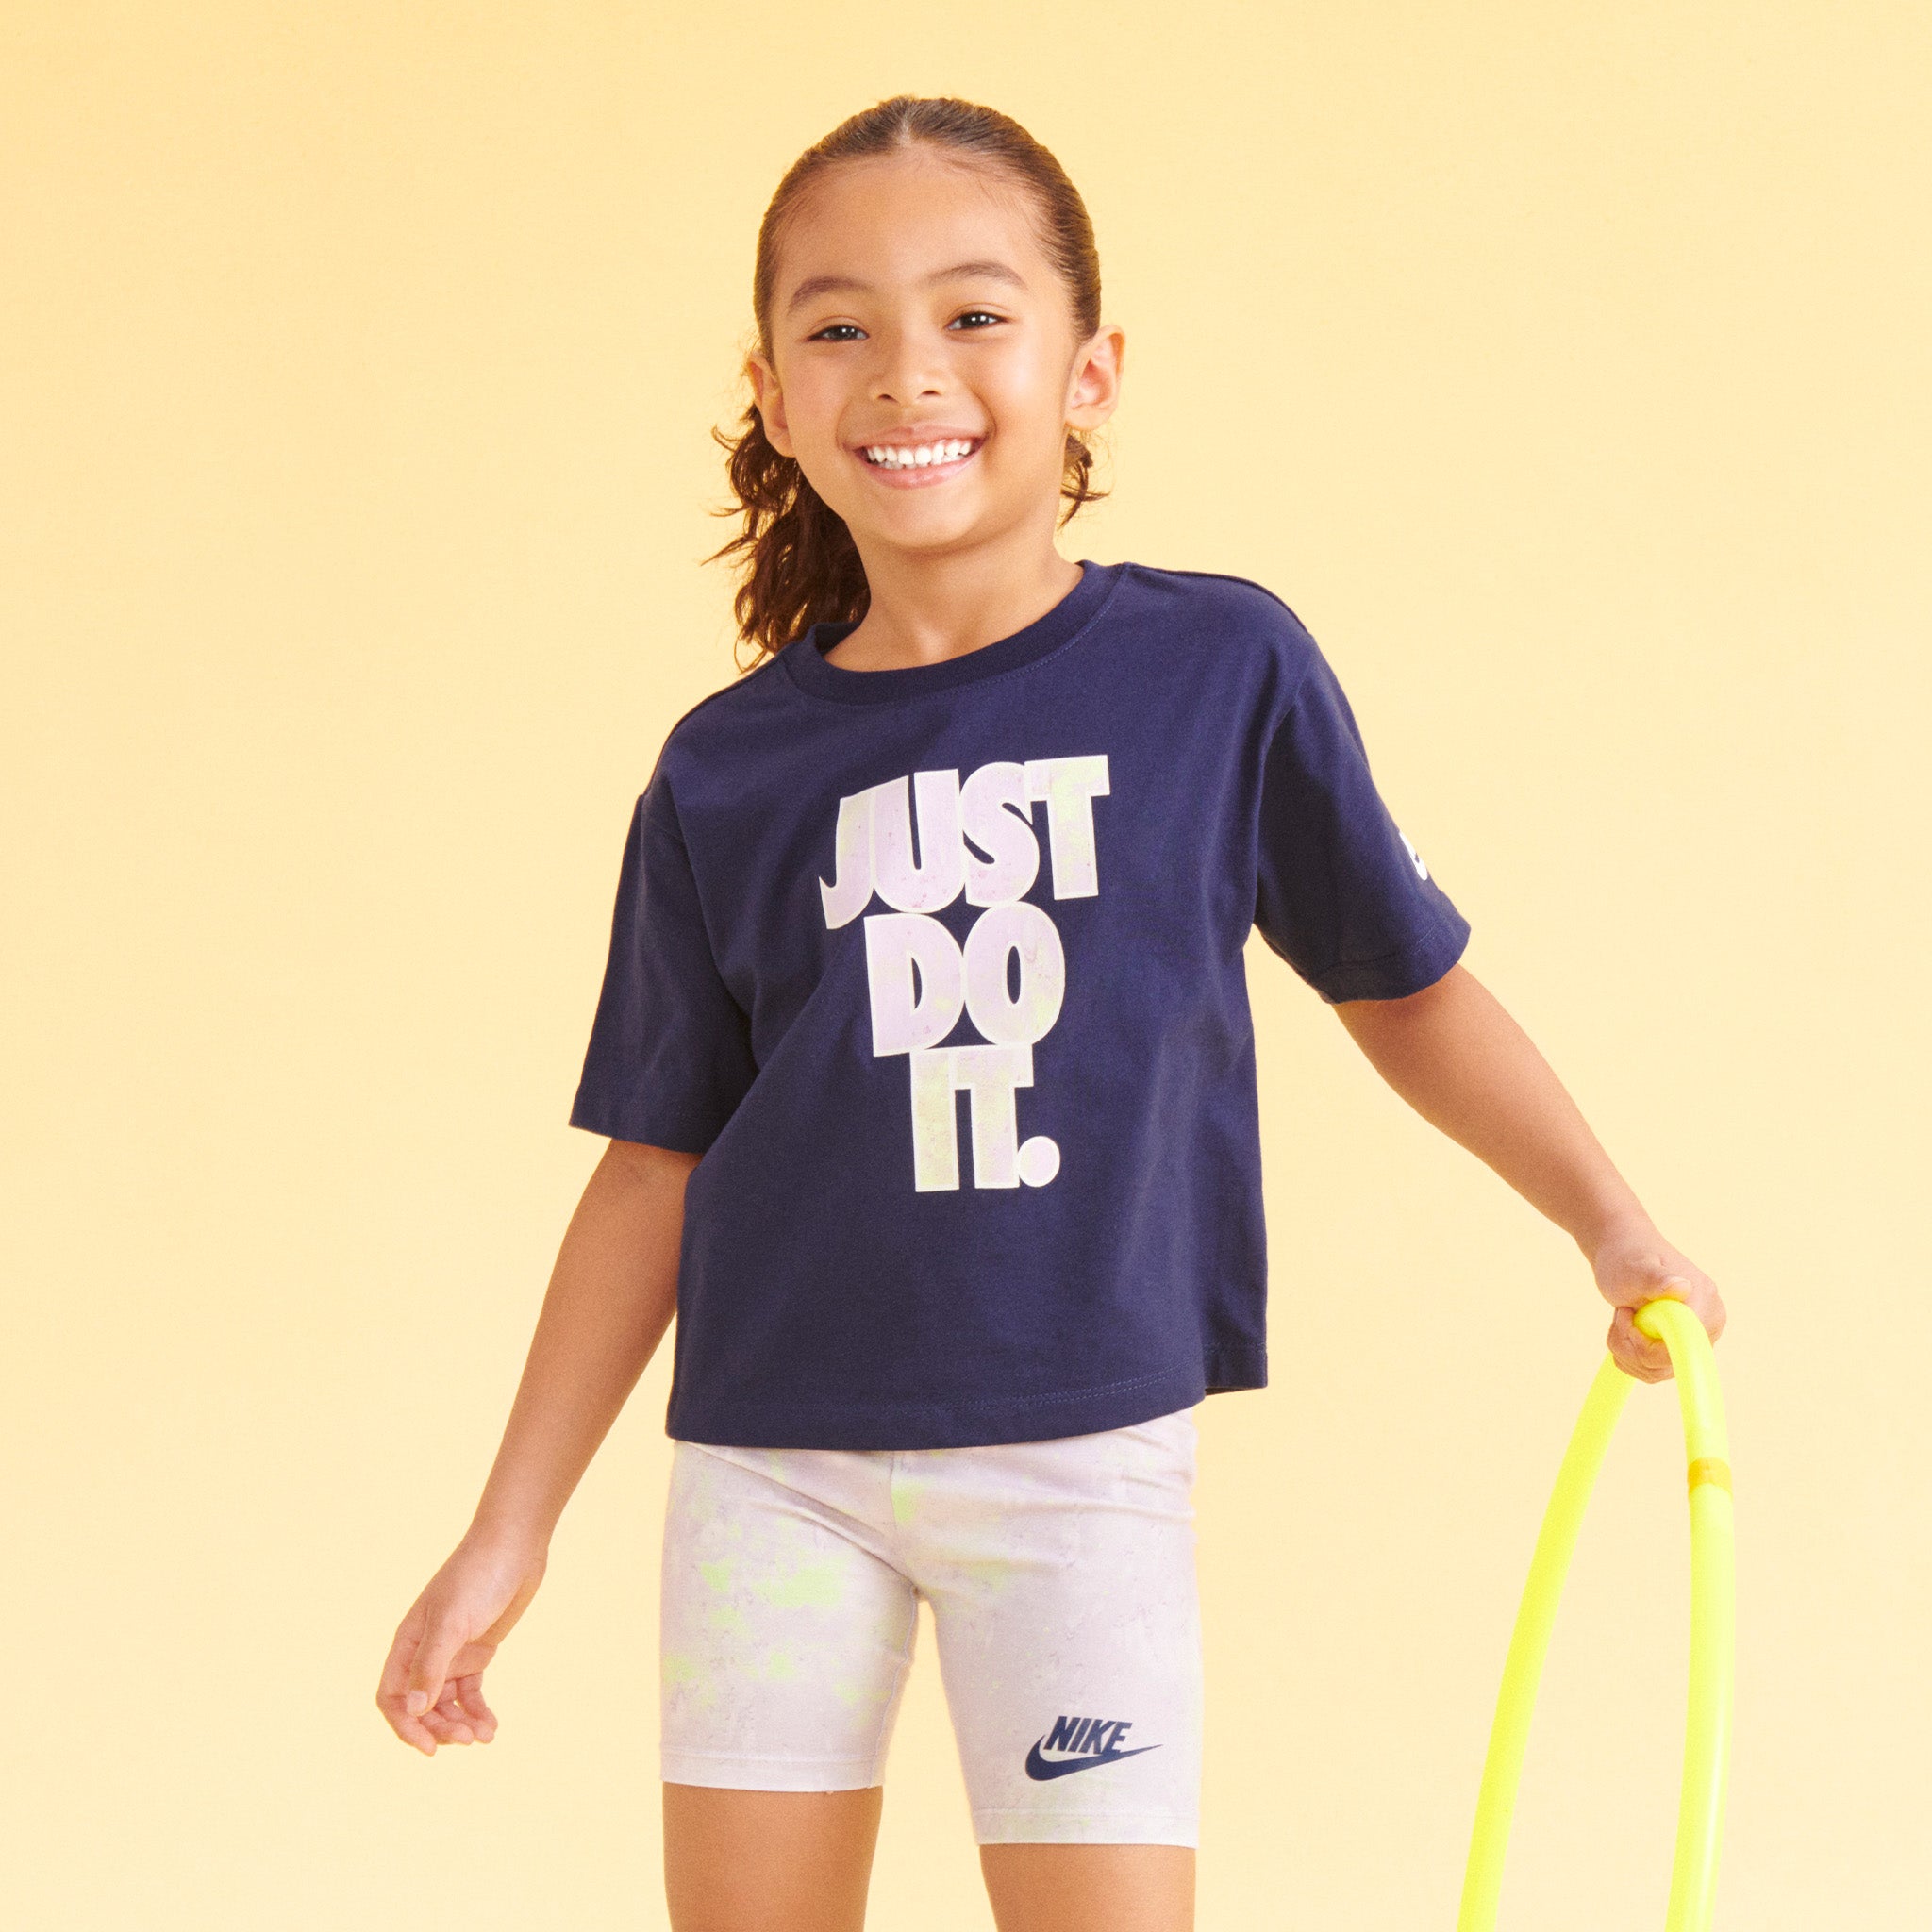 young girl wearing a navy blue Nike Just Do It t-shirt and multi-colored shorts.